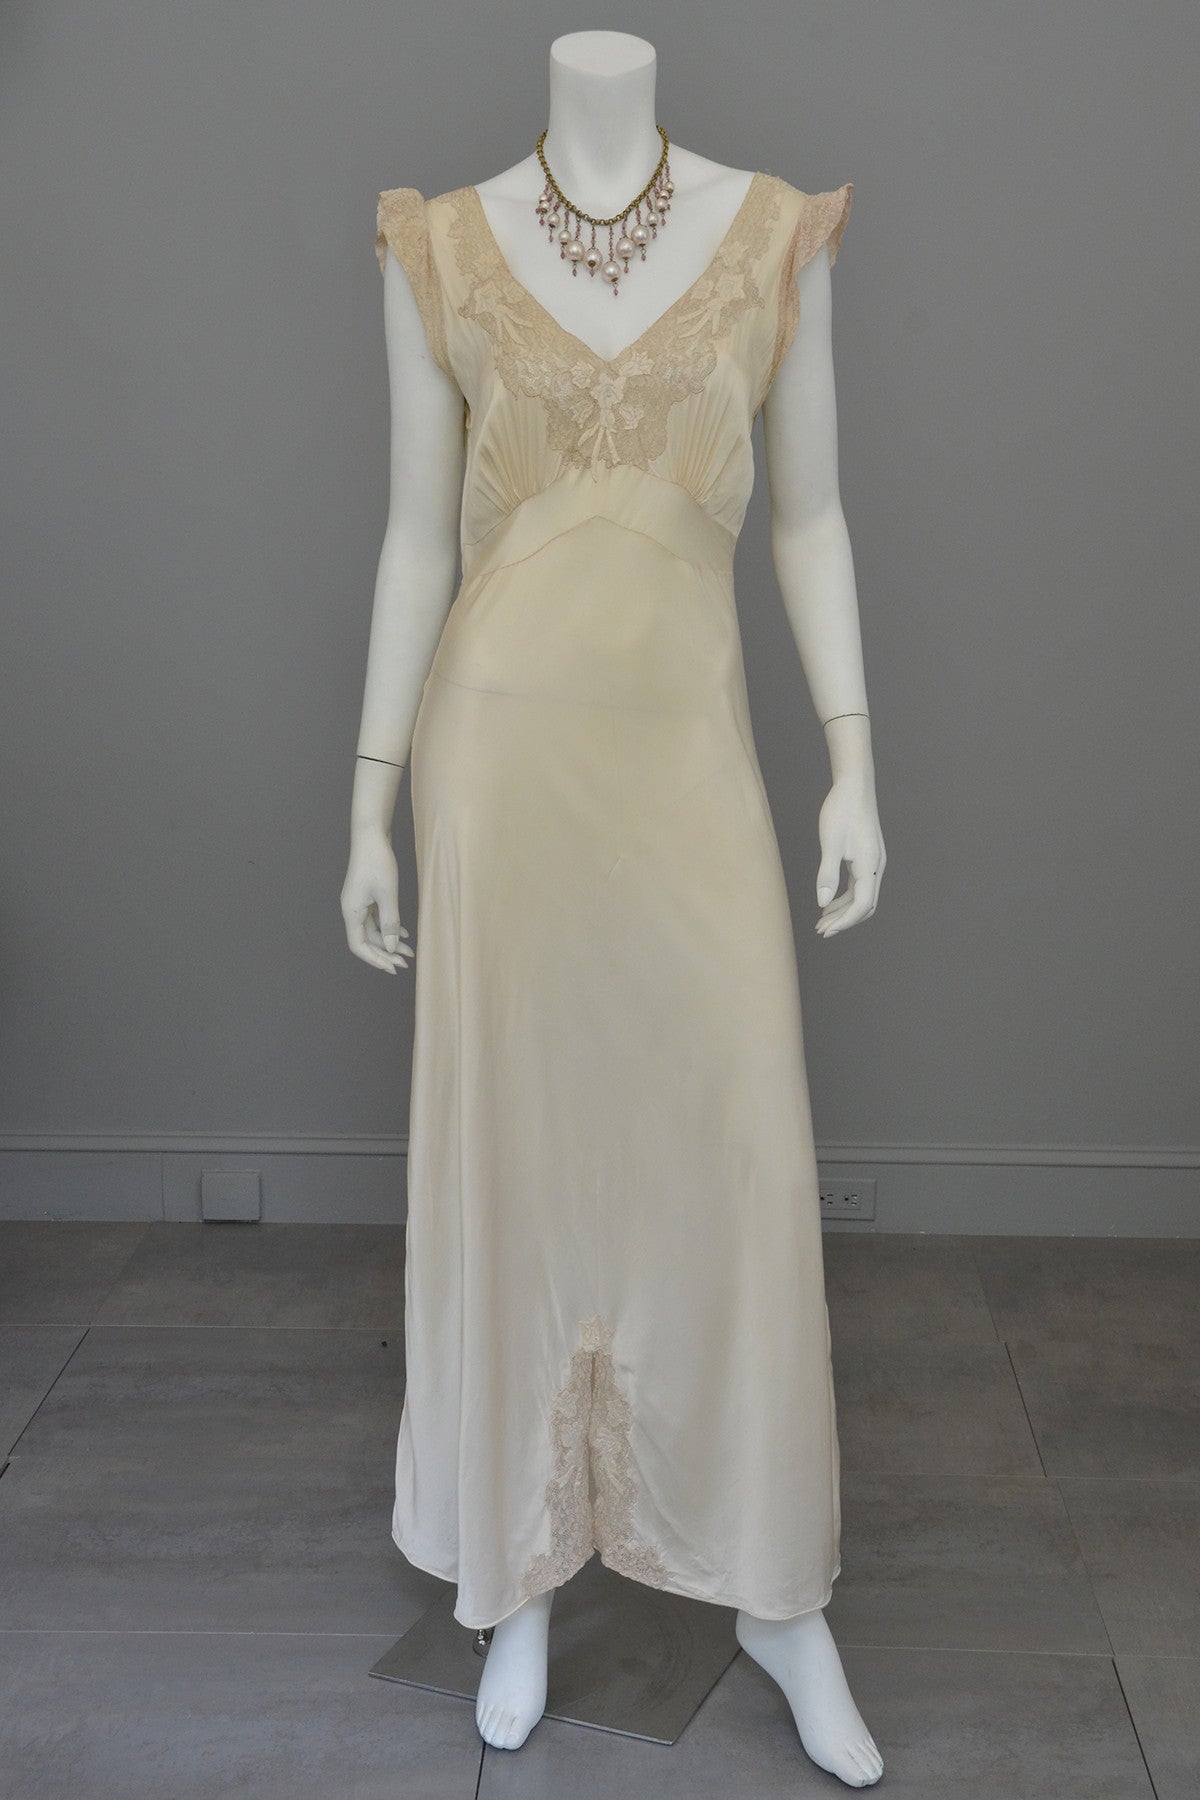 1930s Cream Satin Lace Vintage Gown Negligee Nightgown